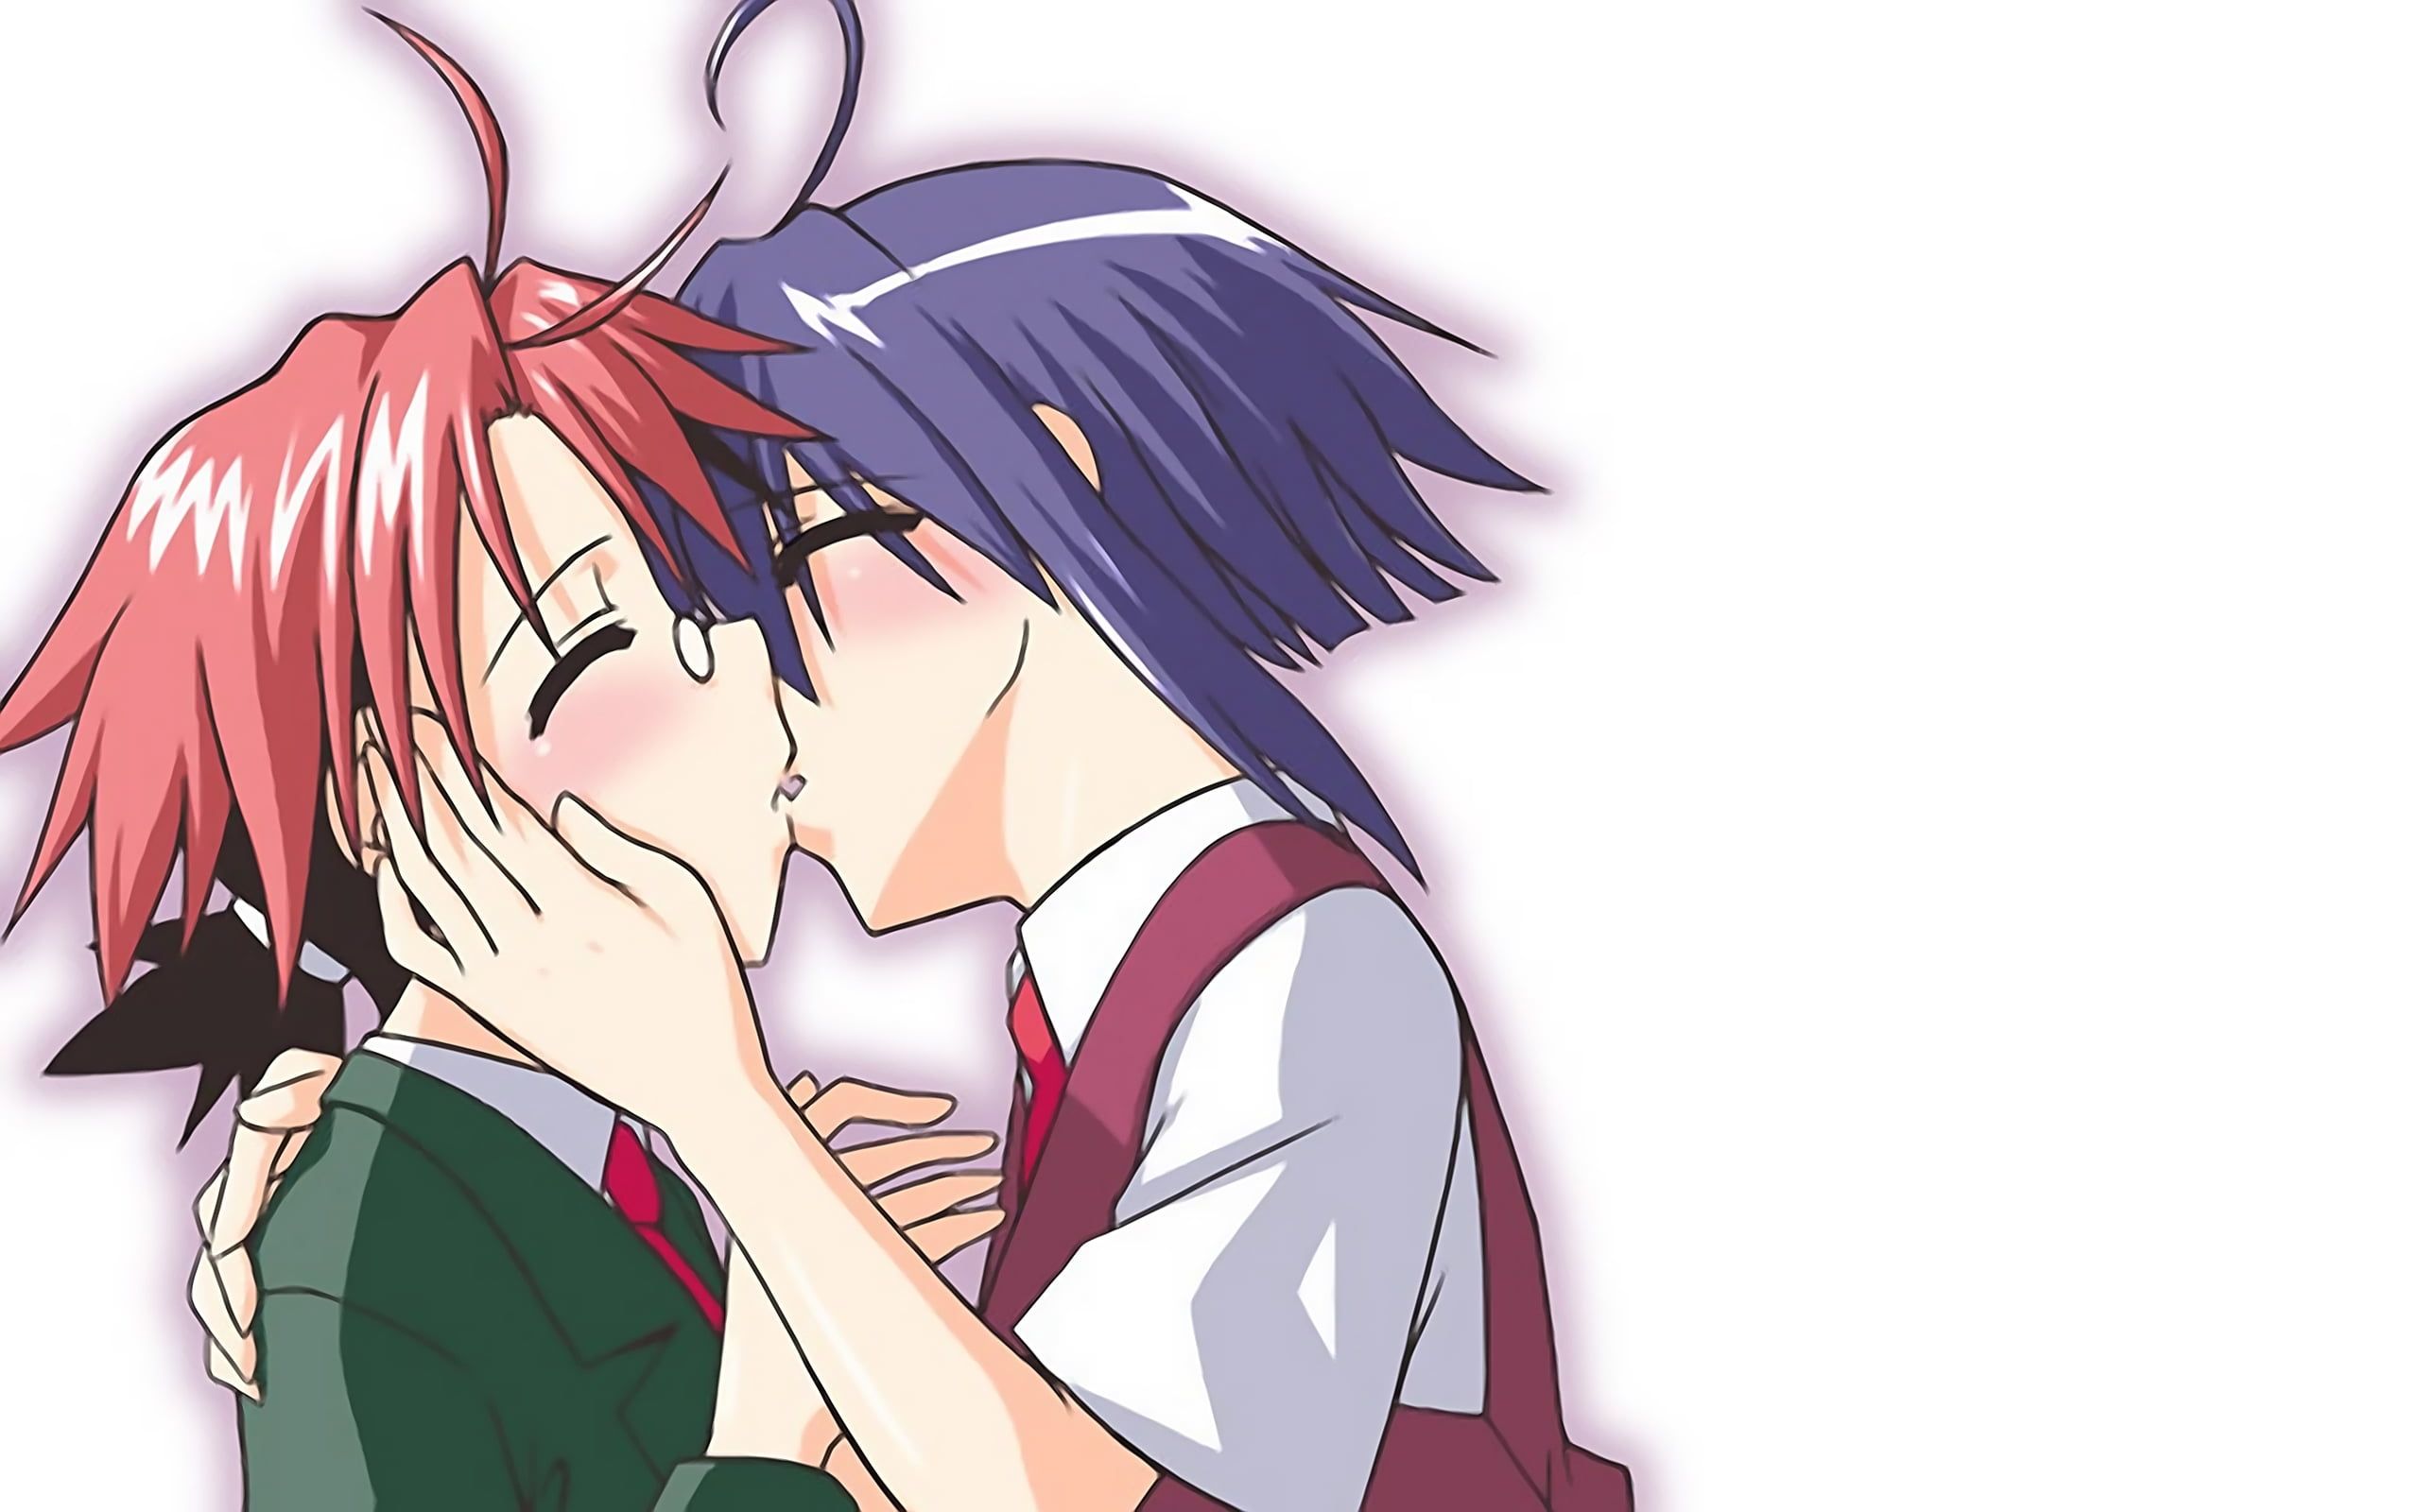 Kissing Anime Character Anime Couple Kissing Sketch with Colored Pencils  Stock Illustration  Illustration of manga crazy 244820258